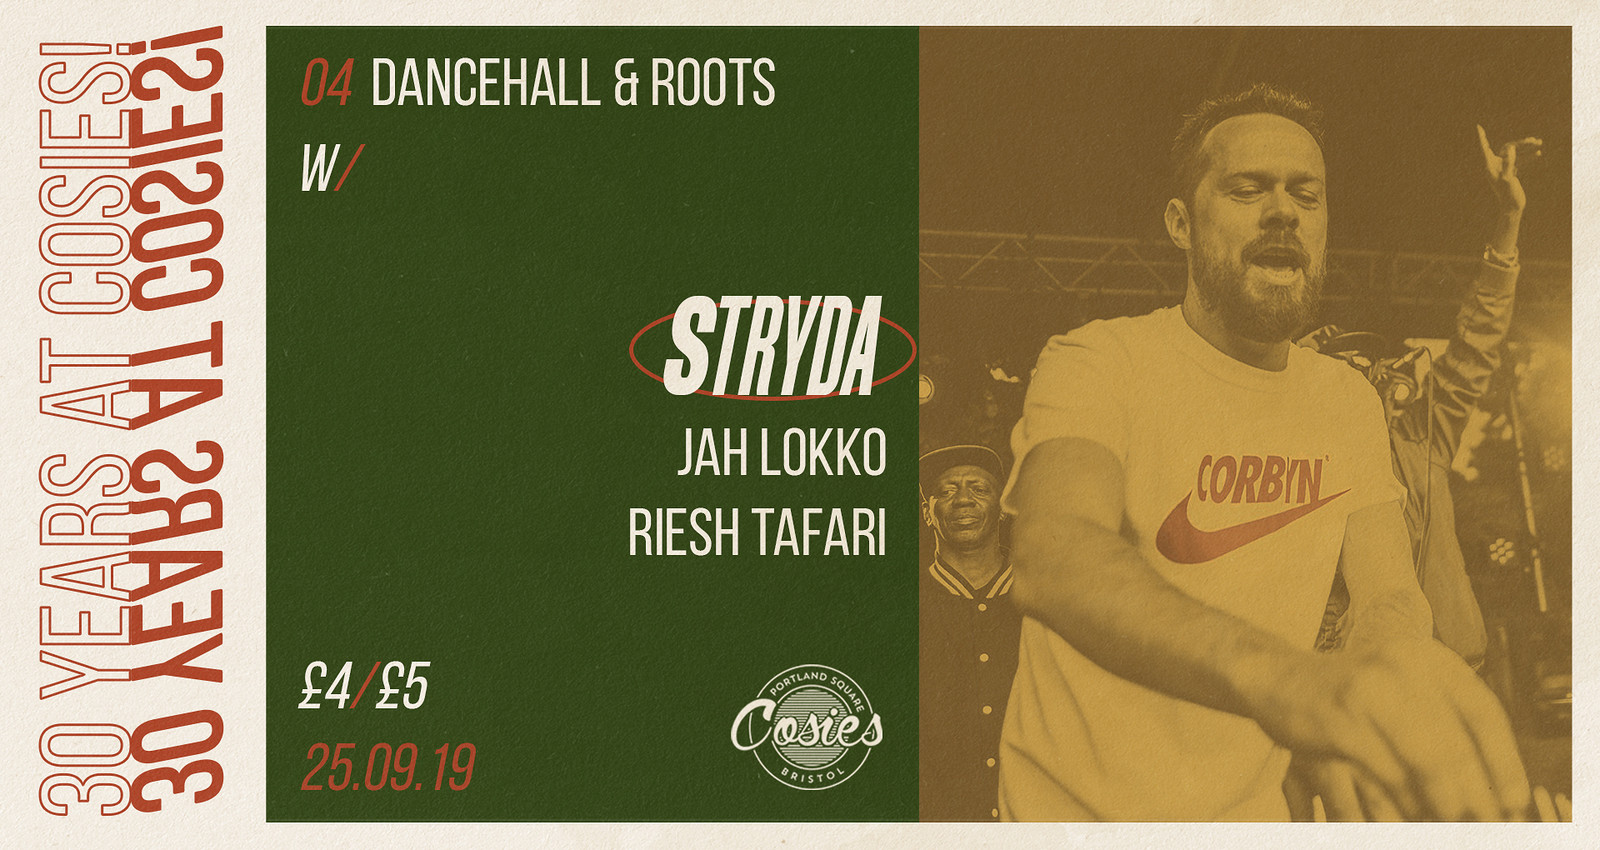 30 Years at Cosies Week 1 - Dancehall & Roots at Cosies